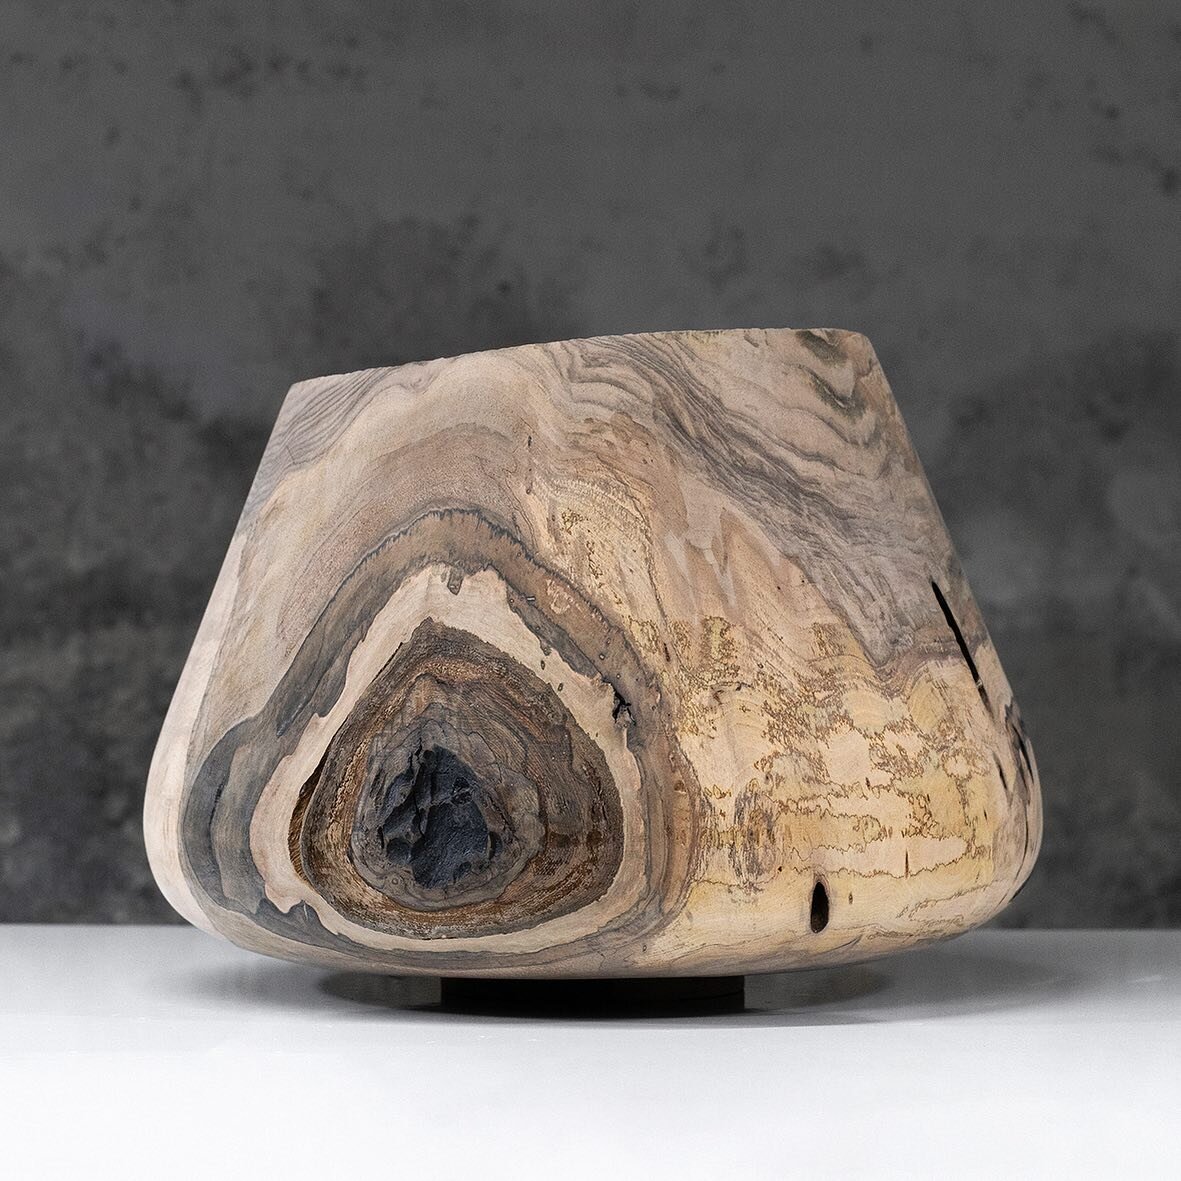 RUINS XIII - European Walnut - 380 x 380 x 280 mm -
-
-
The seasoning process plays a fundamental role in my work, because it is there that the connection between me and the material is most unfolded, in that tension between the shape I have chosen a